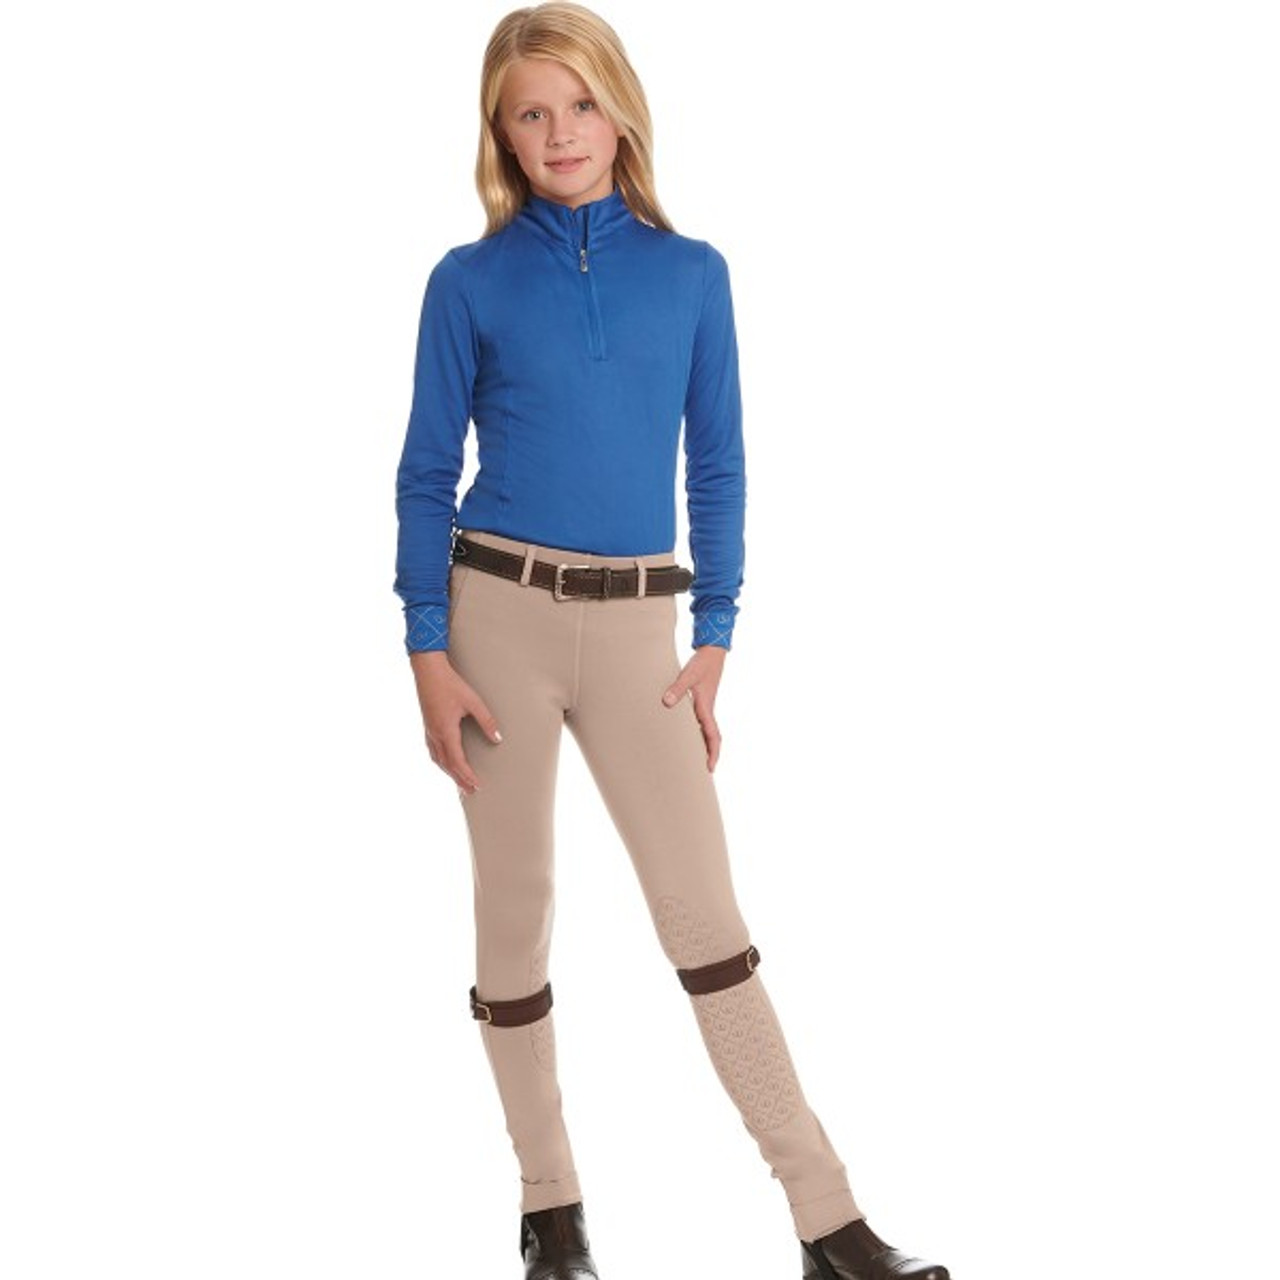 Equistar Childs Pull On Cotton Knee Patch Riding Breeches 